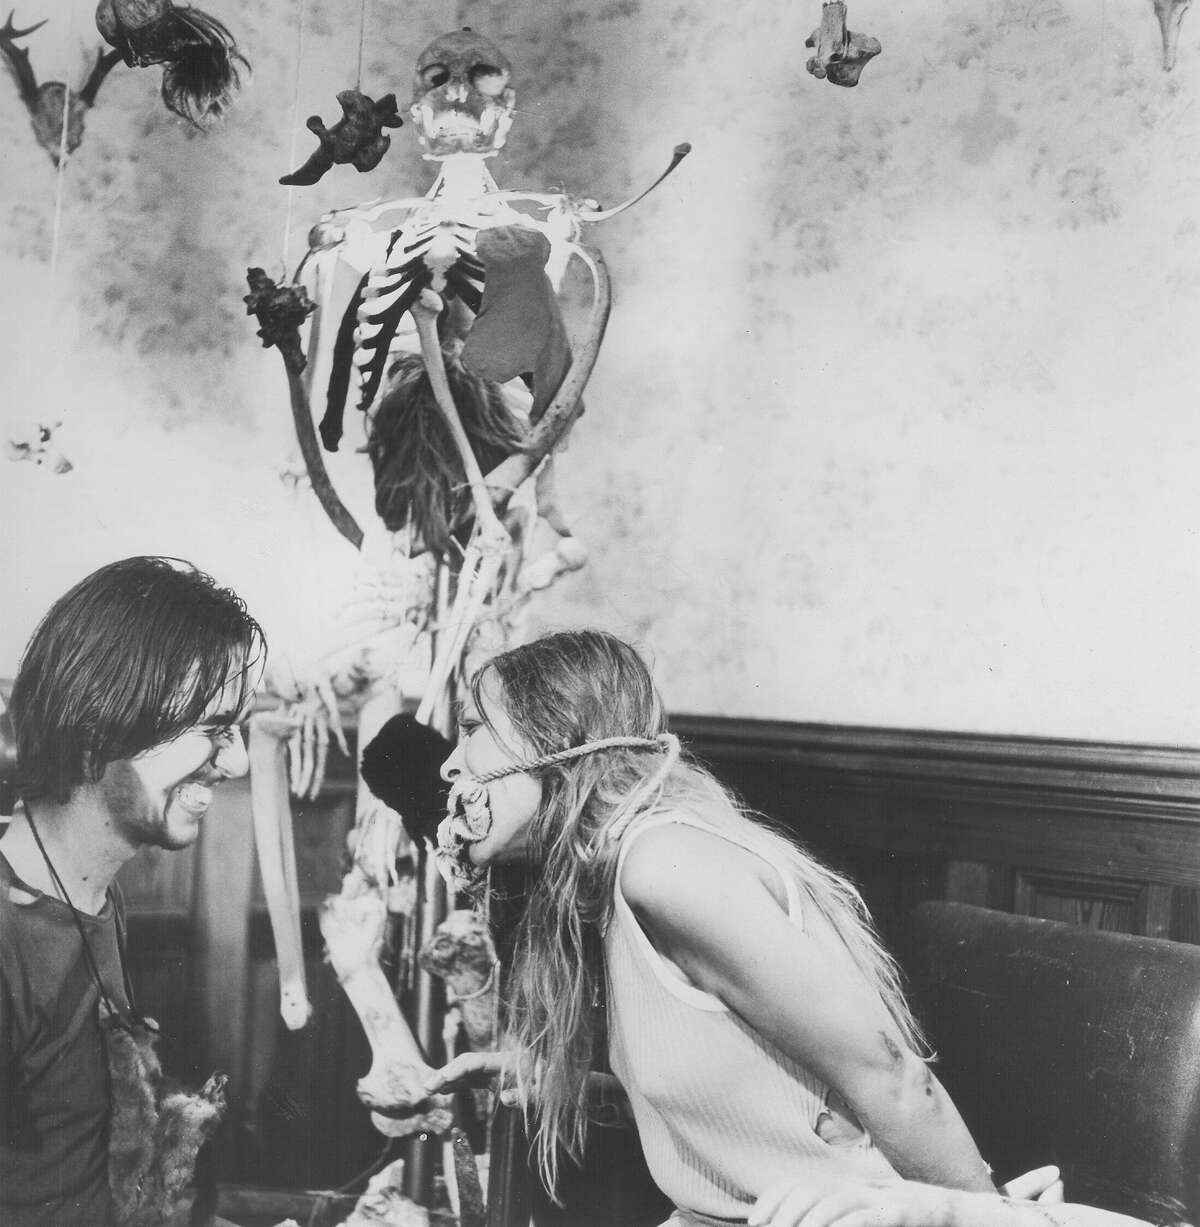 Edwin Neal and Marilyn Burns in a scene from "The Texas Chain Saw Massacre," 1974.Keep clicking for more celebrities and public figures we've lost this year.